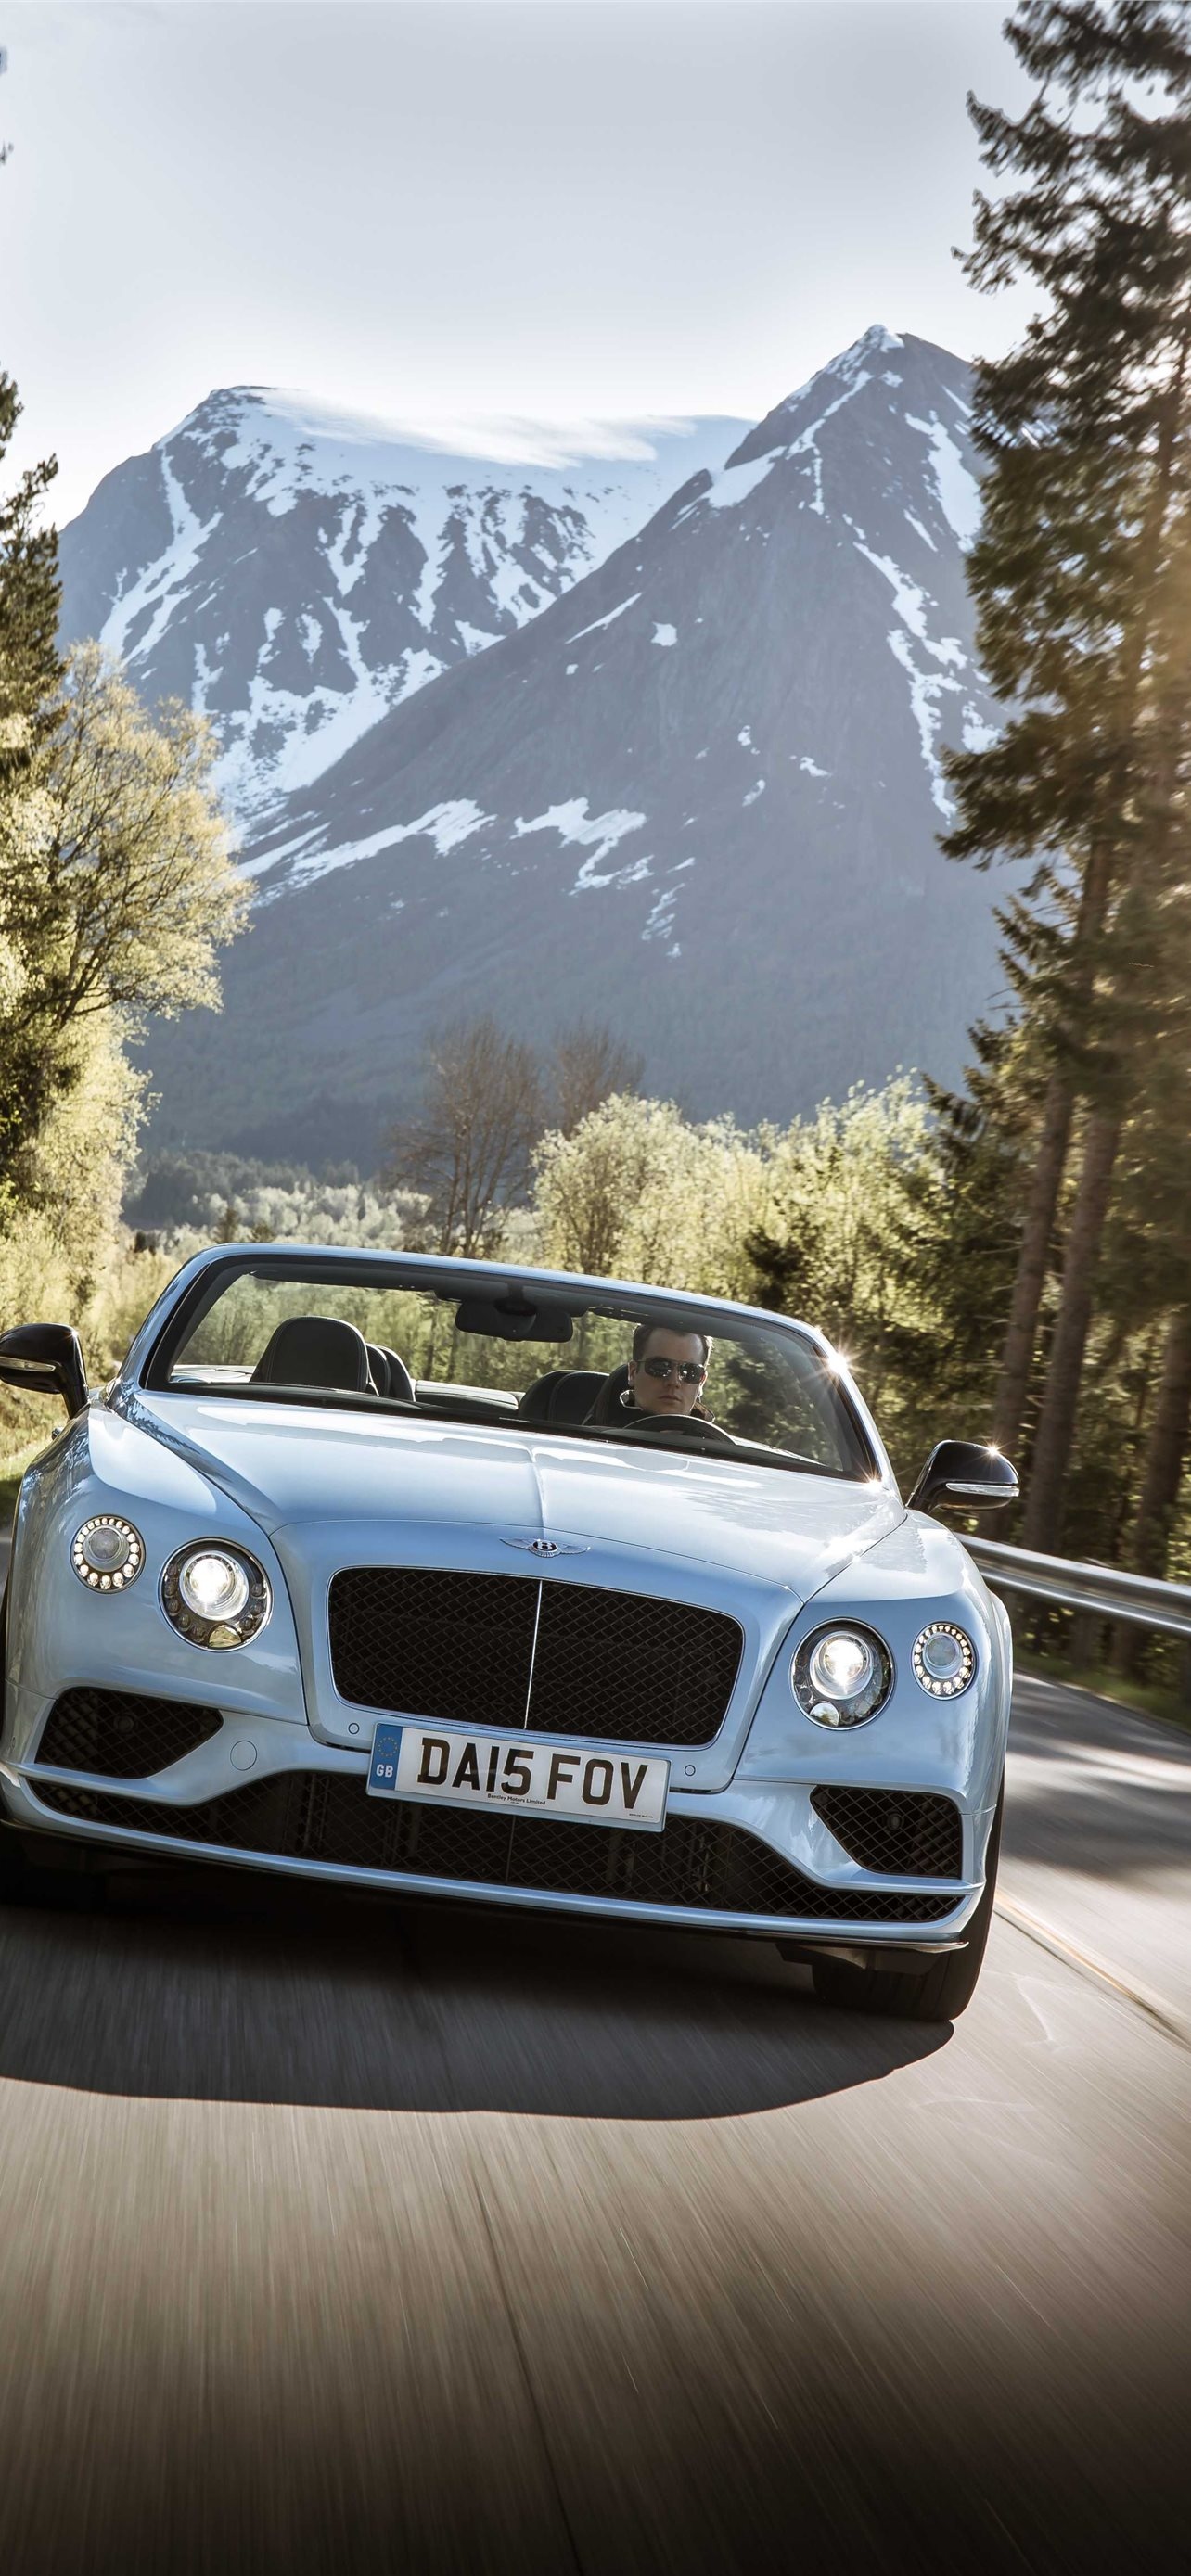 Bentley Continental, GT Speed version, Free iPhone wallpapers, High-quality images, 1290x2780 HD Handy